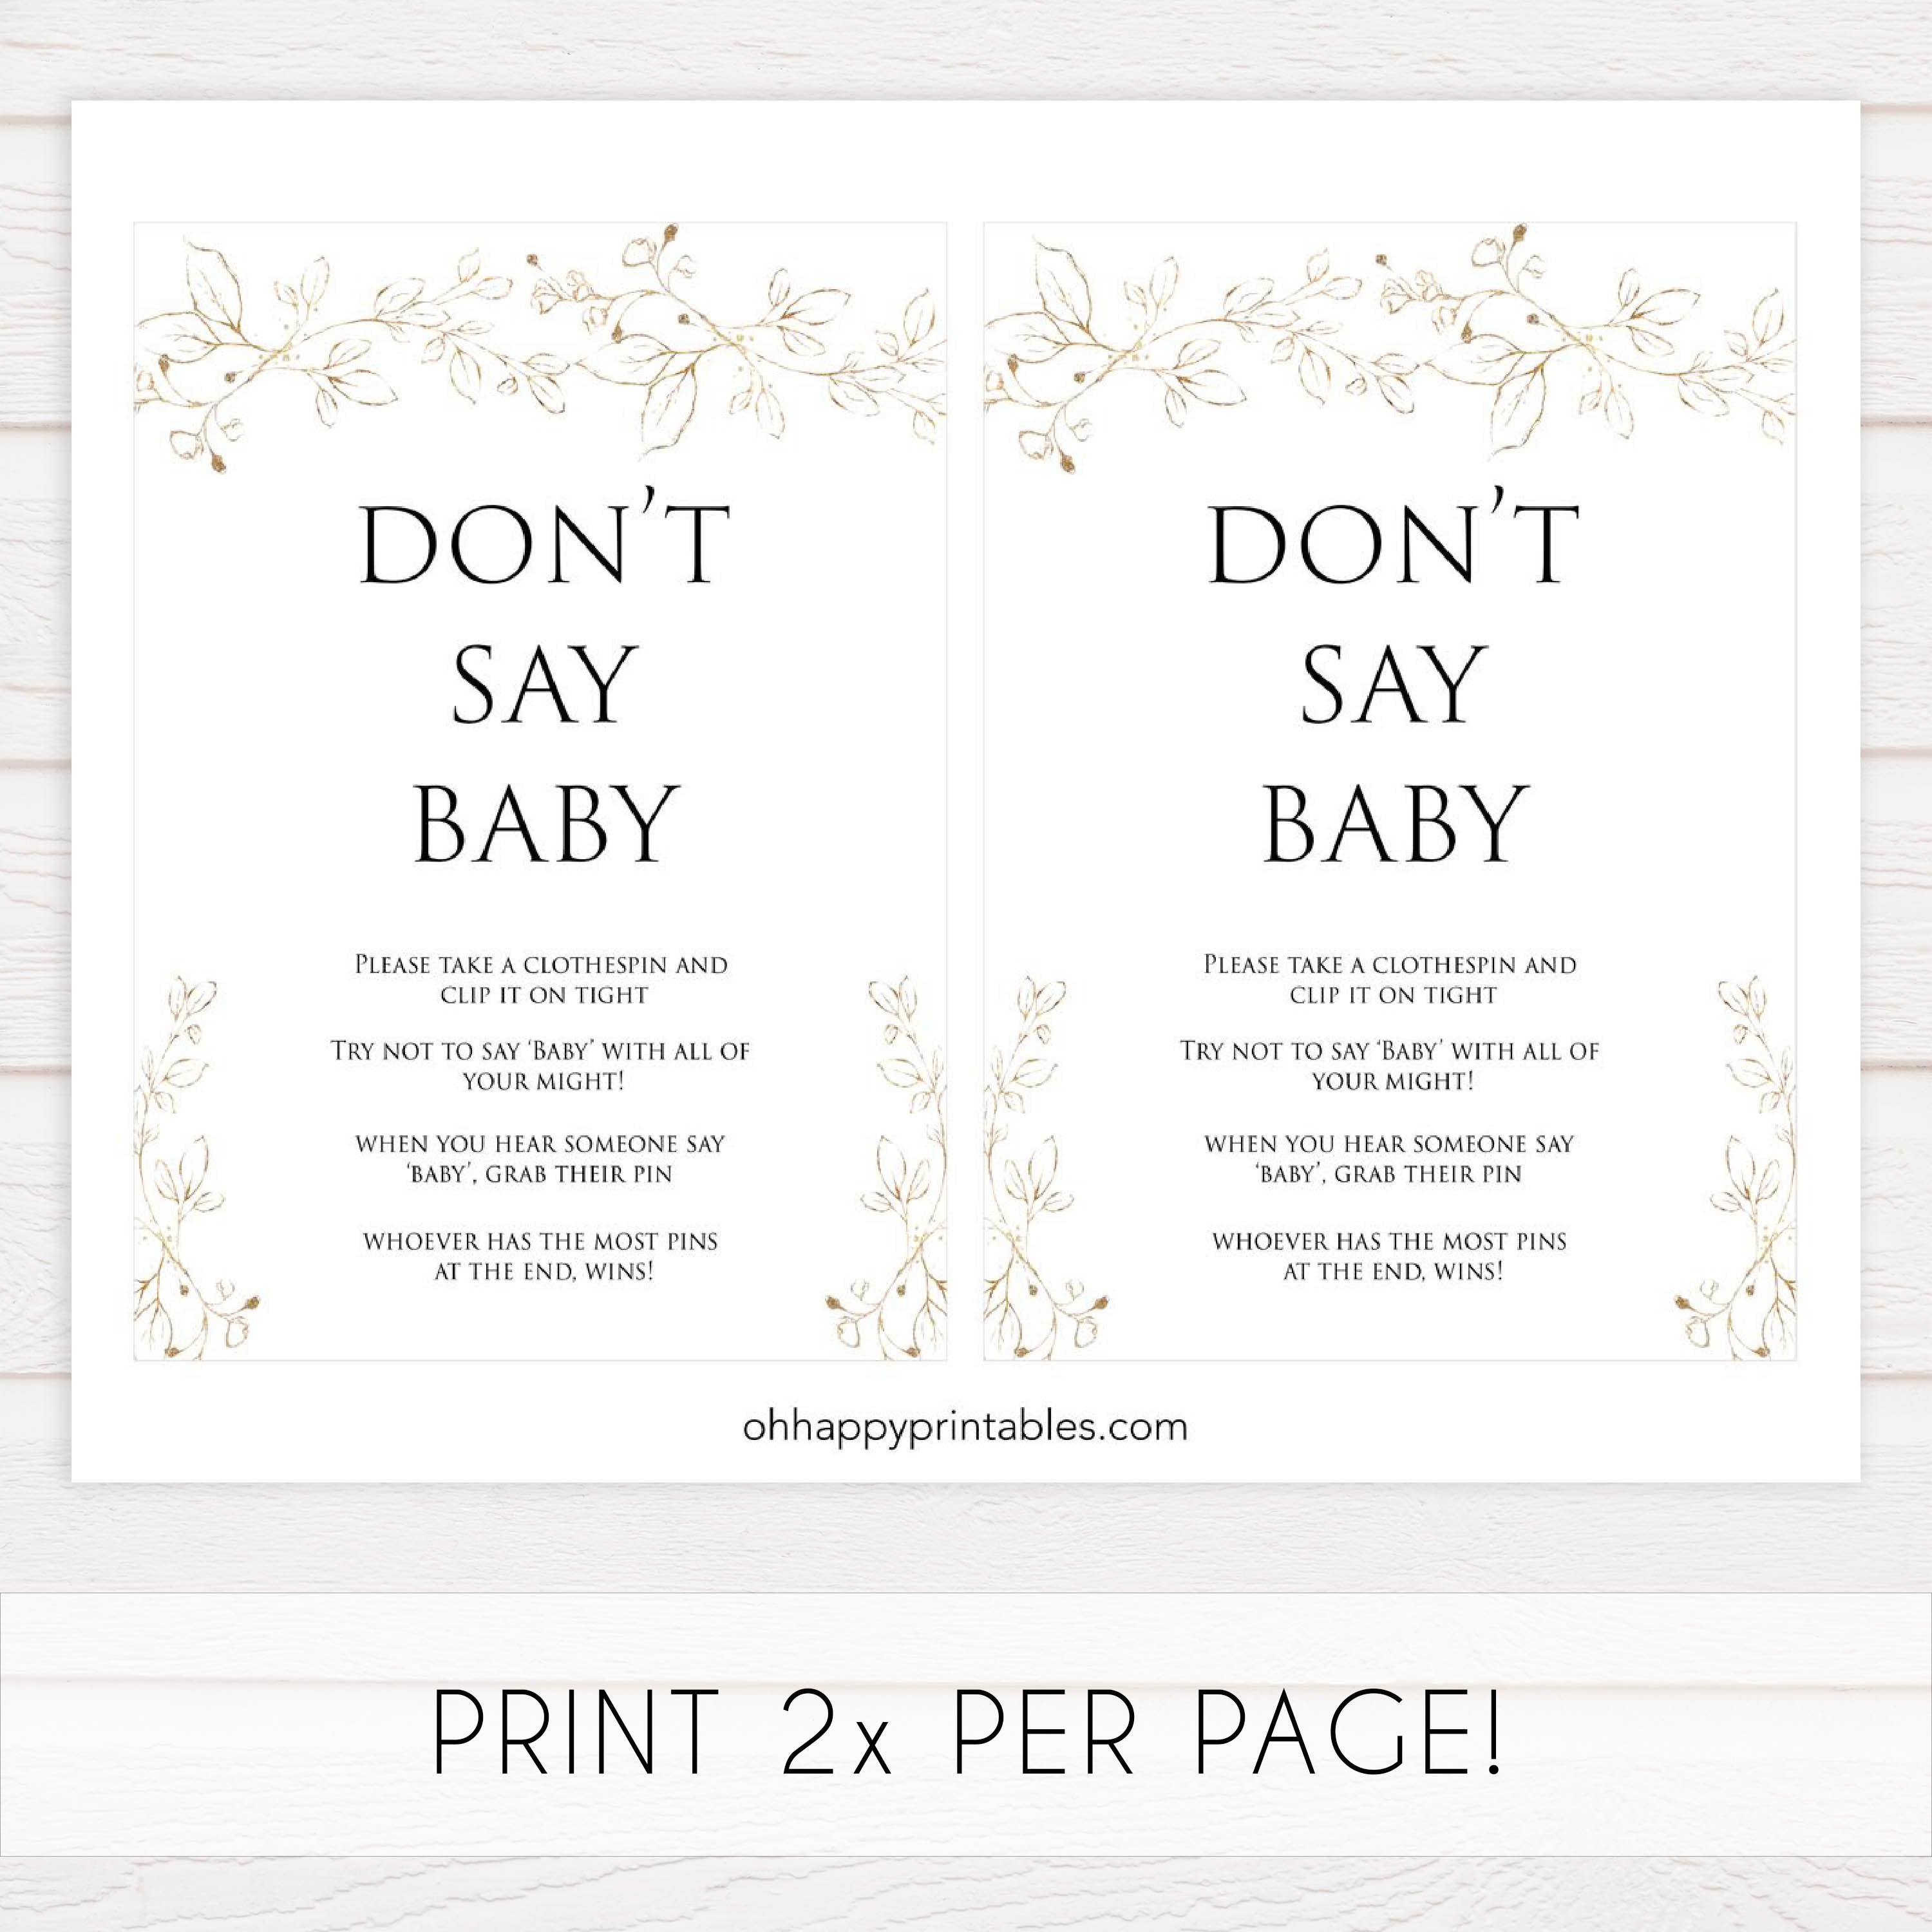 dont say baby game, Printable baby shower games, gold leaf baby games, baby shower games, fun baby shower ideas, top baby shower ideas, gold leaf baby shower, baby shower games, fun gold leaf baby shower ideas